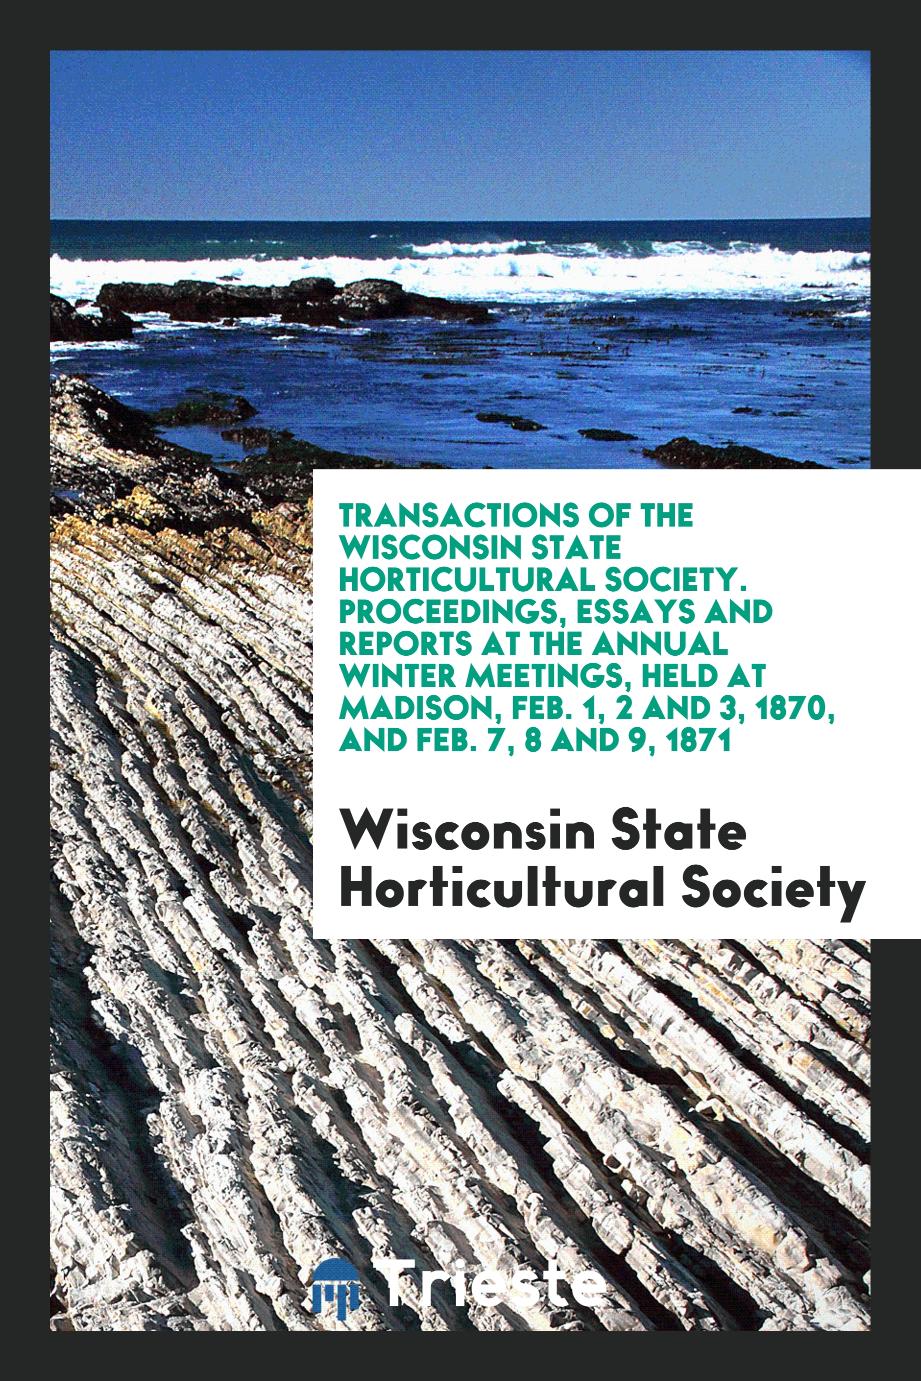 Transactions of the Wisconsin State Horticultural Society. Proceedings, Essays and Reports at the Annual Winter Meetings, Held at Madison, Feb. 1, 2 and 3, 1870, and Feb. 7, 8 and 9, 1871